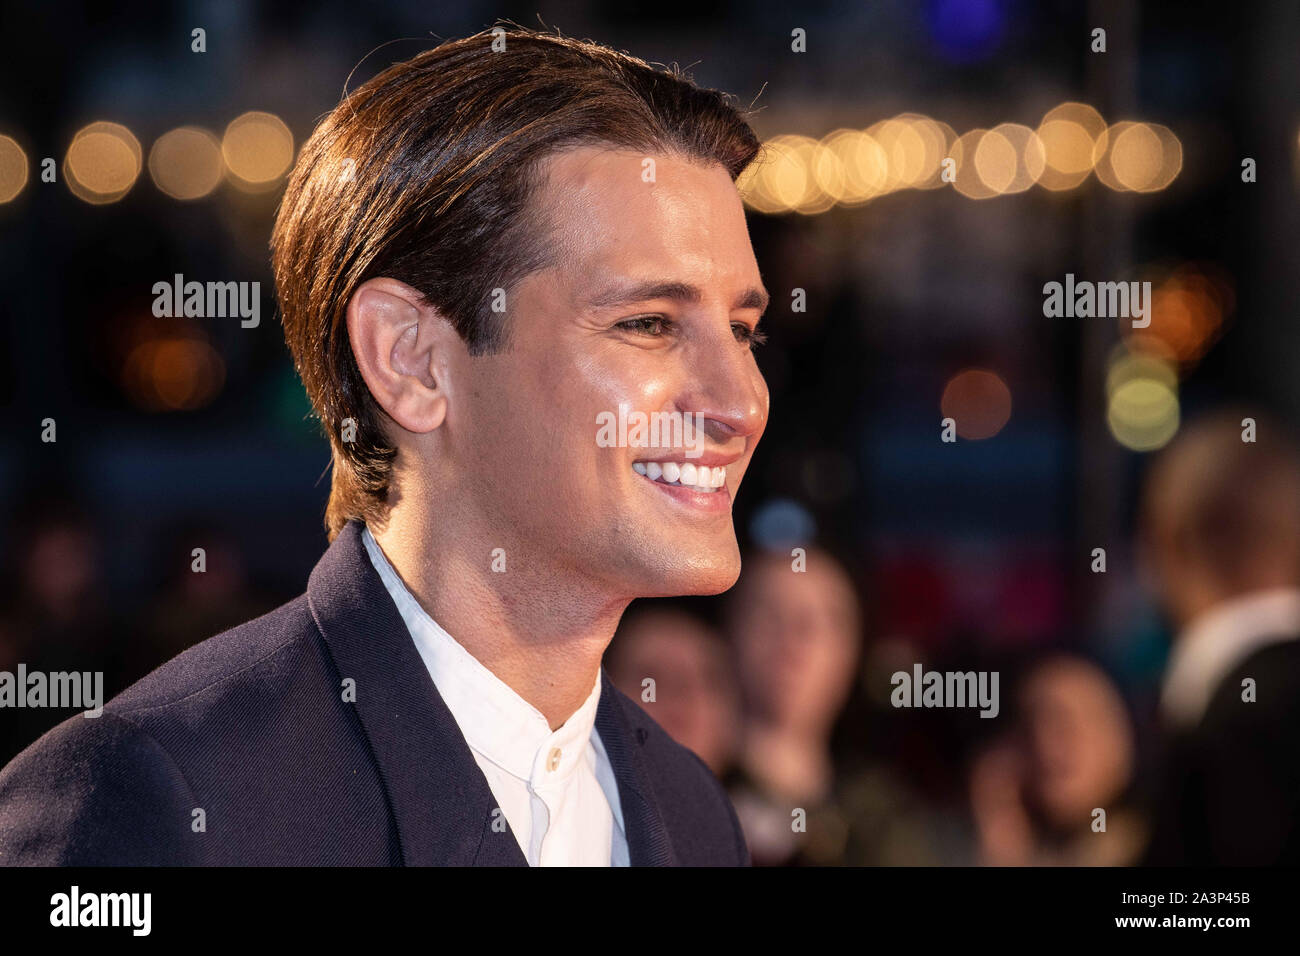 Ollie Locke attending the Greed European Premiere as part of the BFI London Film Festival 2019 held at the Odeon Luxe, Leicester Square in London. PA Photo. Picture date: Wednesday October 9, 2019. Photo credit should read: PA Wire Stock Photo